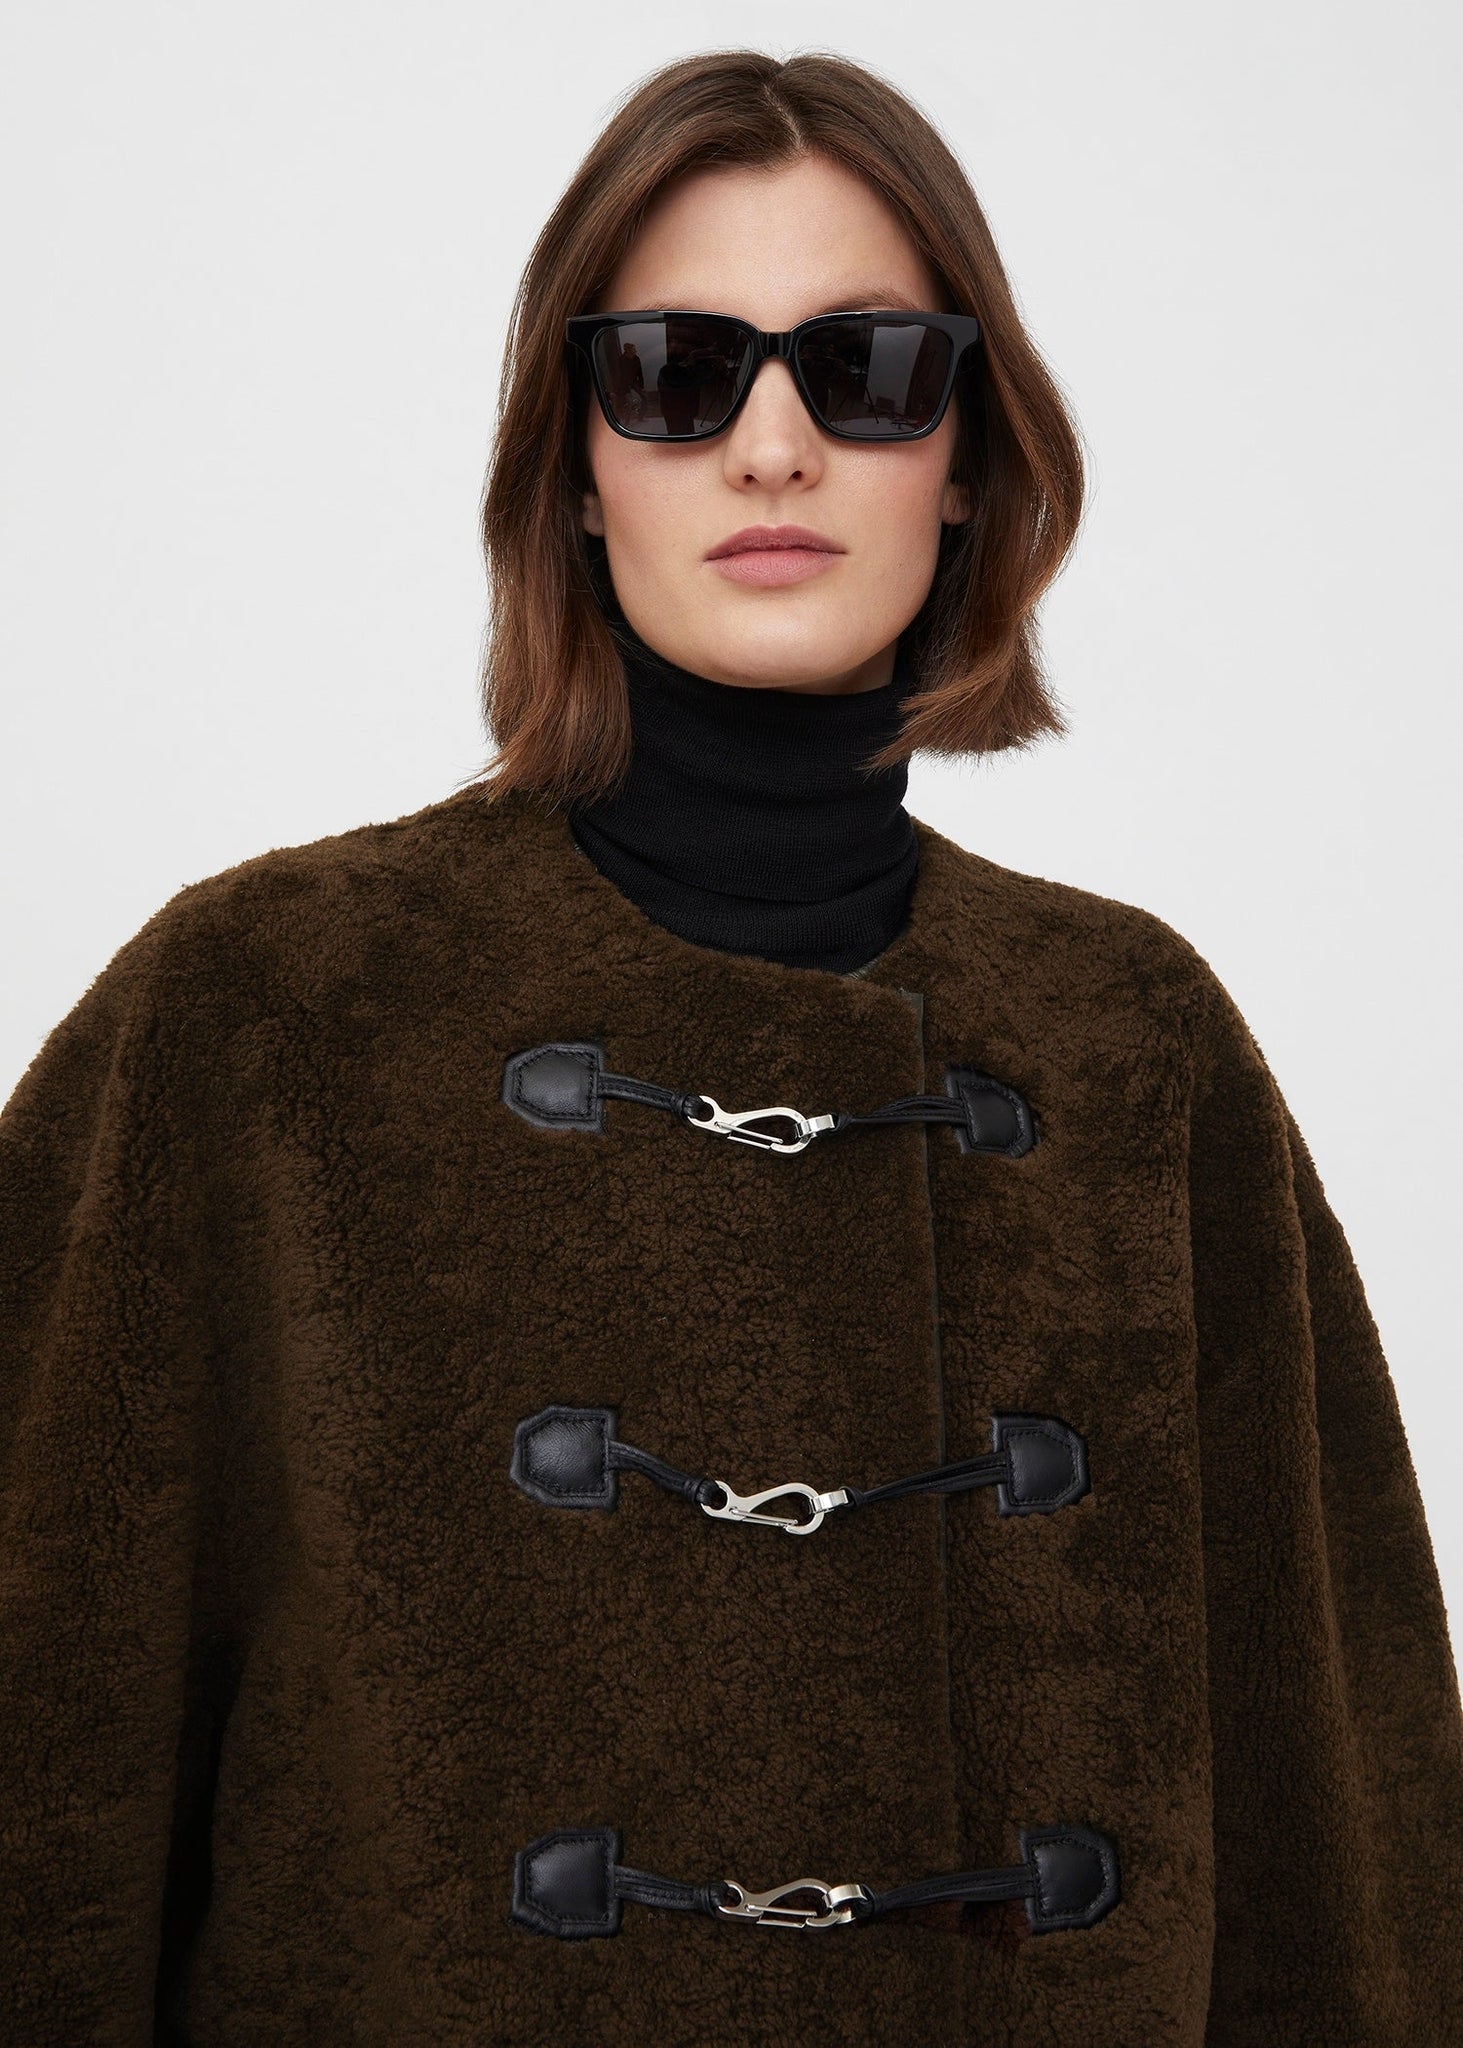 Teddy shearling clasp jacket saddle brown